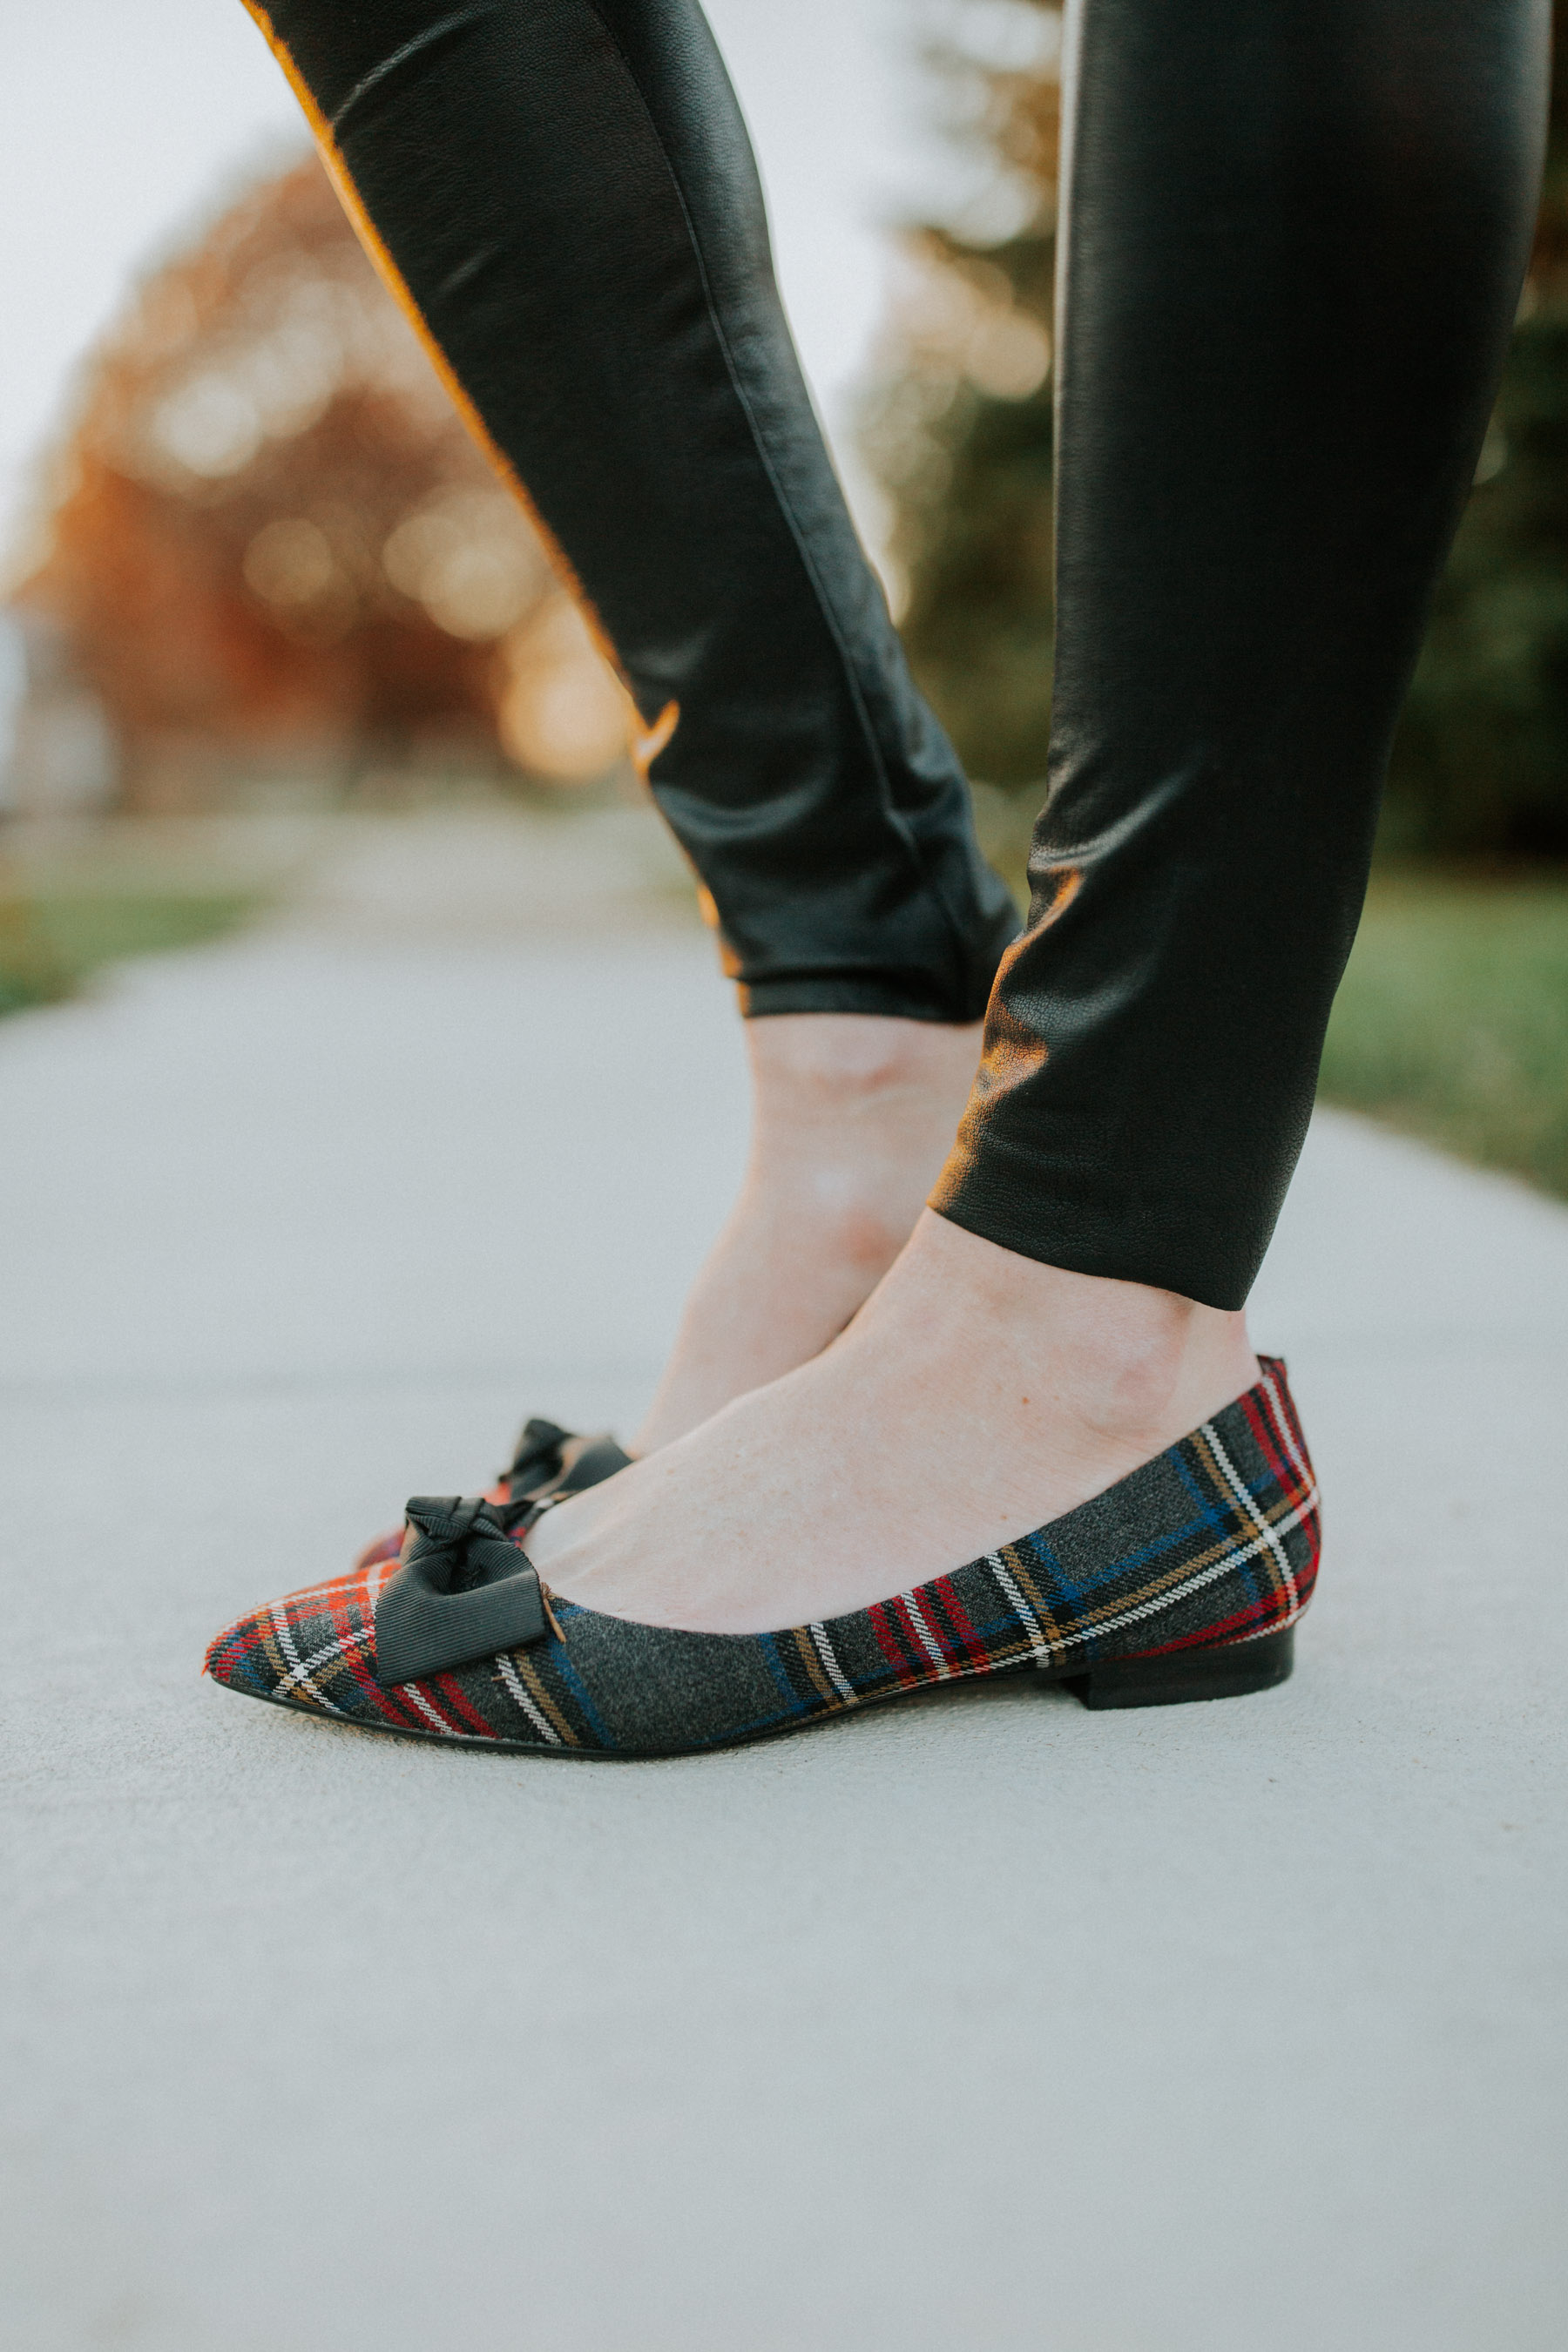 Plaid pointed toe flats with a bow: preppy style